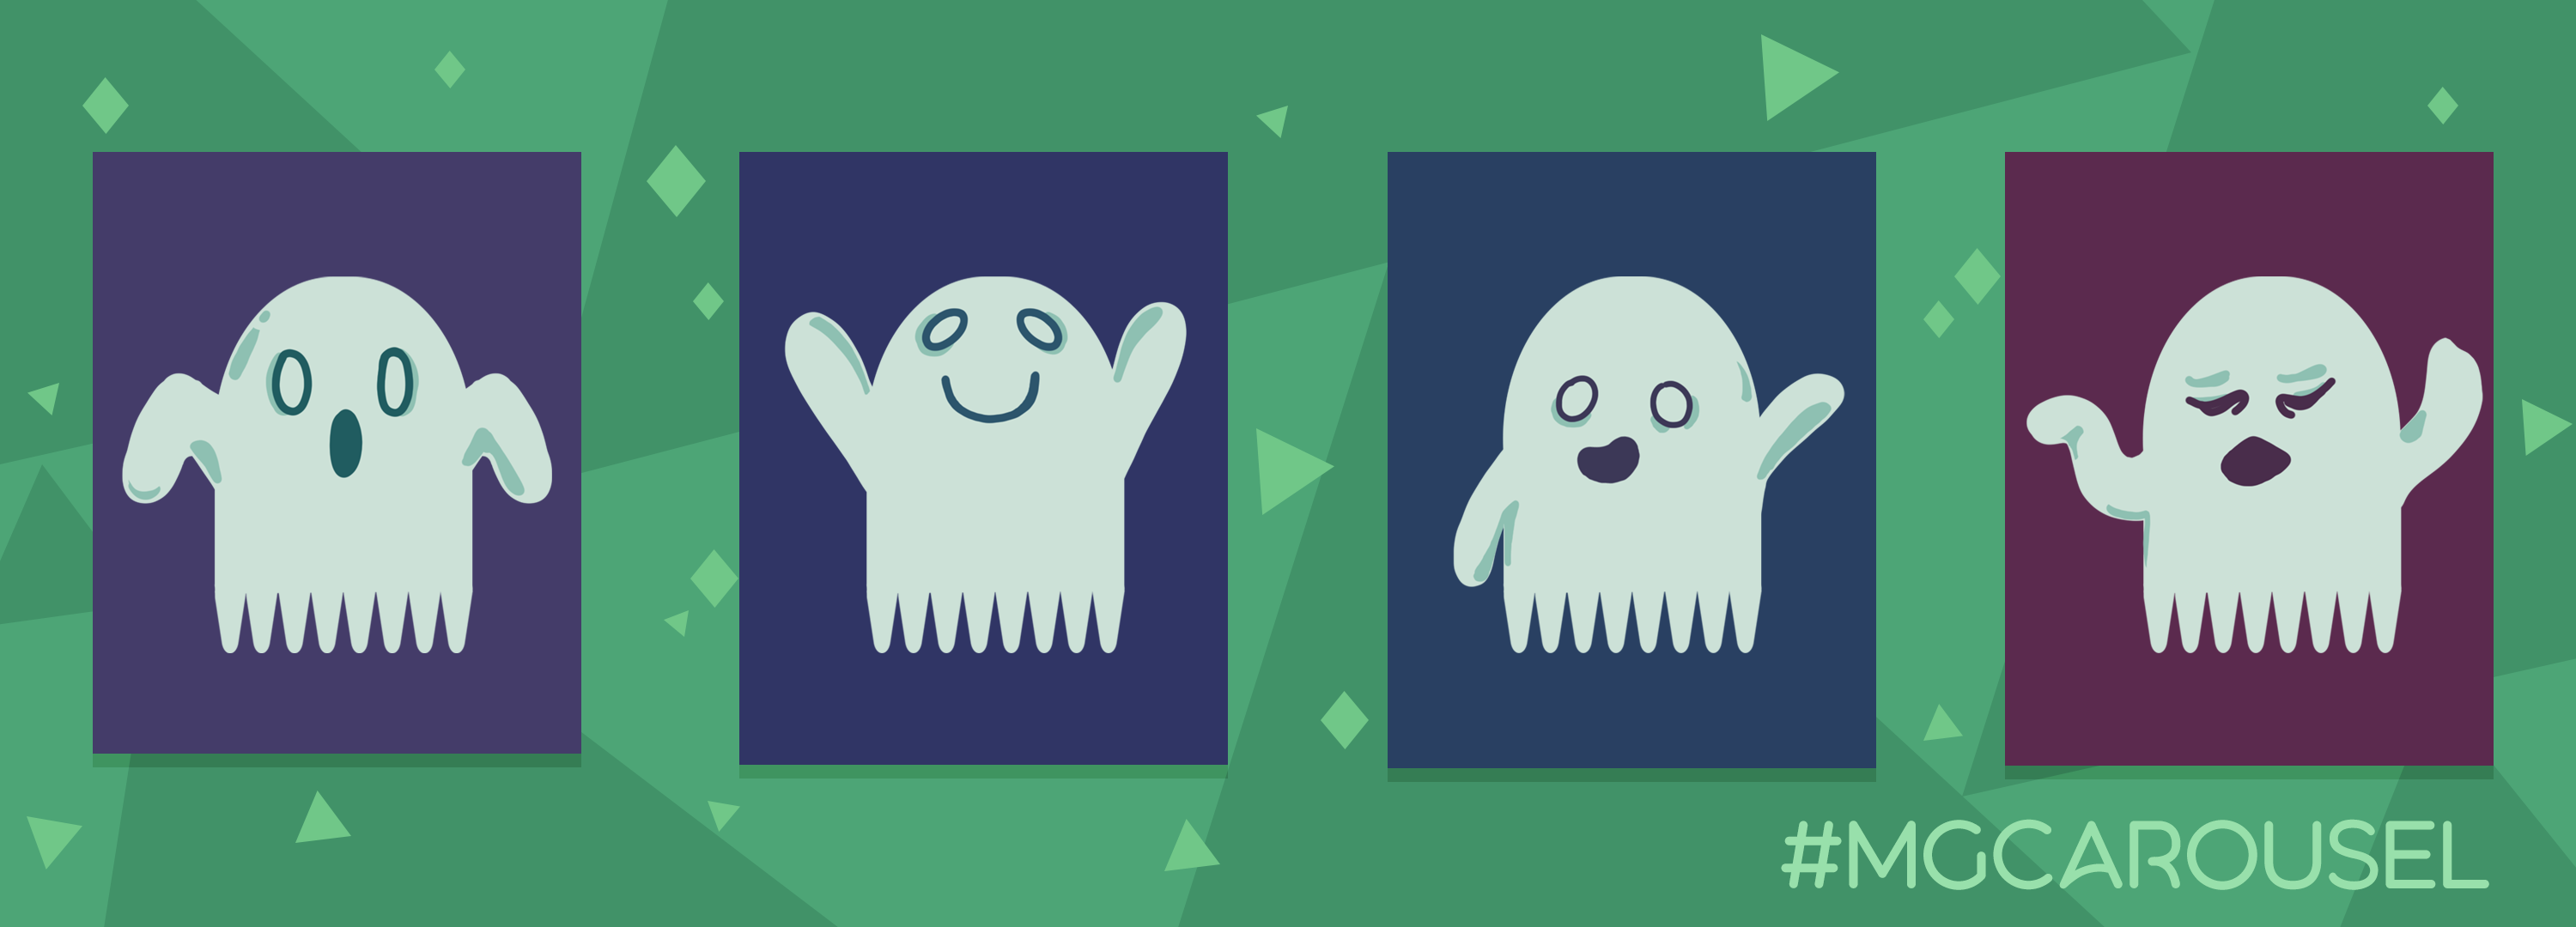 Bookmark for October 2022 features illustrations of ghosts, including one with a surprised, screaming face; a ghost with a wide smile and arms upraised; one waving and smiling in a friendly manner; and one waving its arms and frowning ominously.